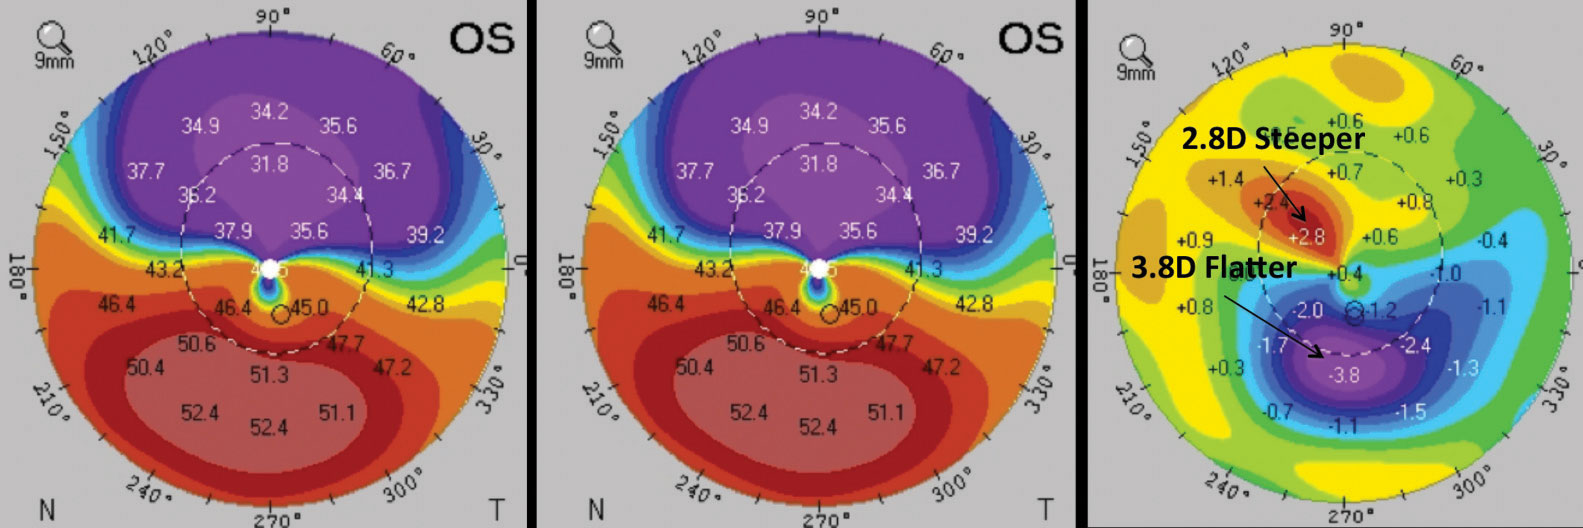 This patient underwent epi-on CXL. Comparing the pre-op (left) and post-op (middle) corneal thickness reveals significant changes in corneal parameters in the difference map (right). Images: William Trattler, MD; International Keratoconus Academy